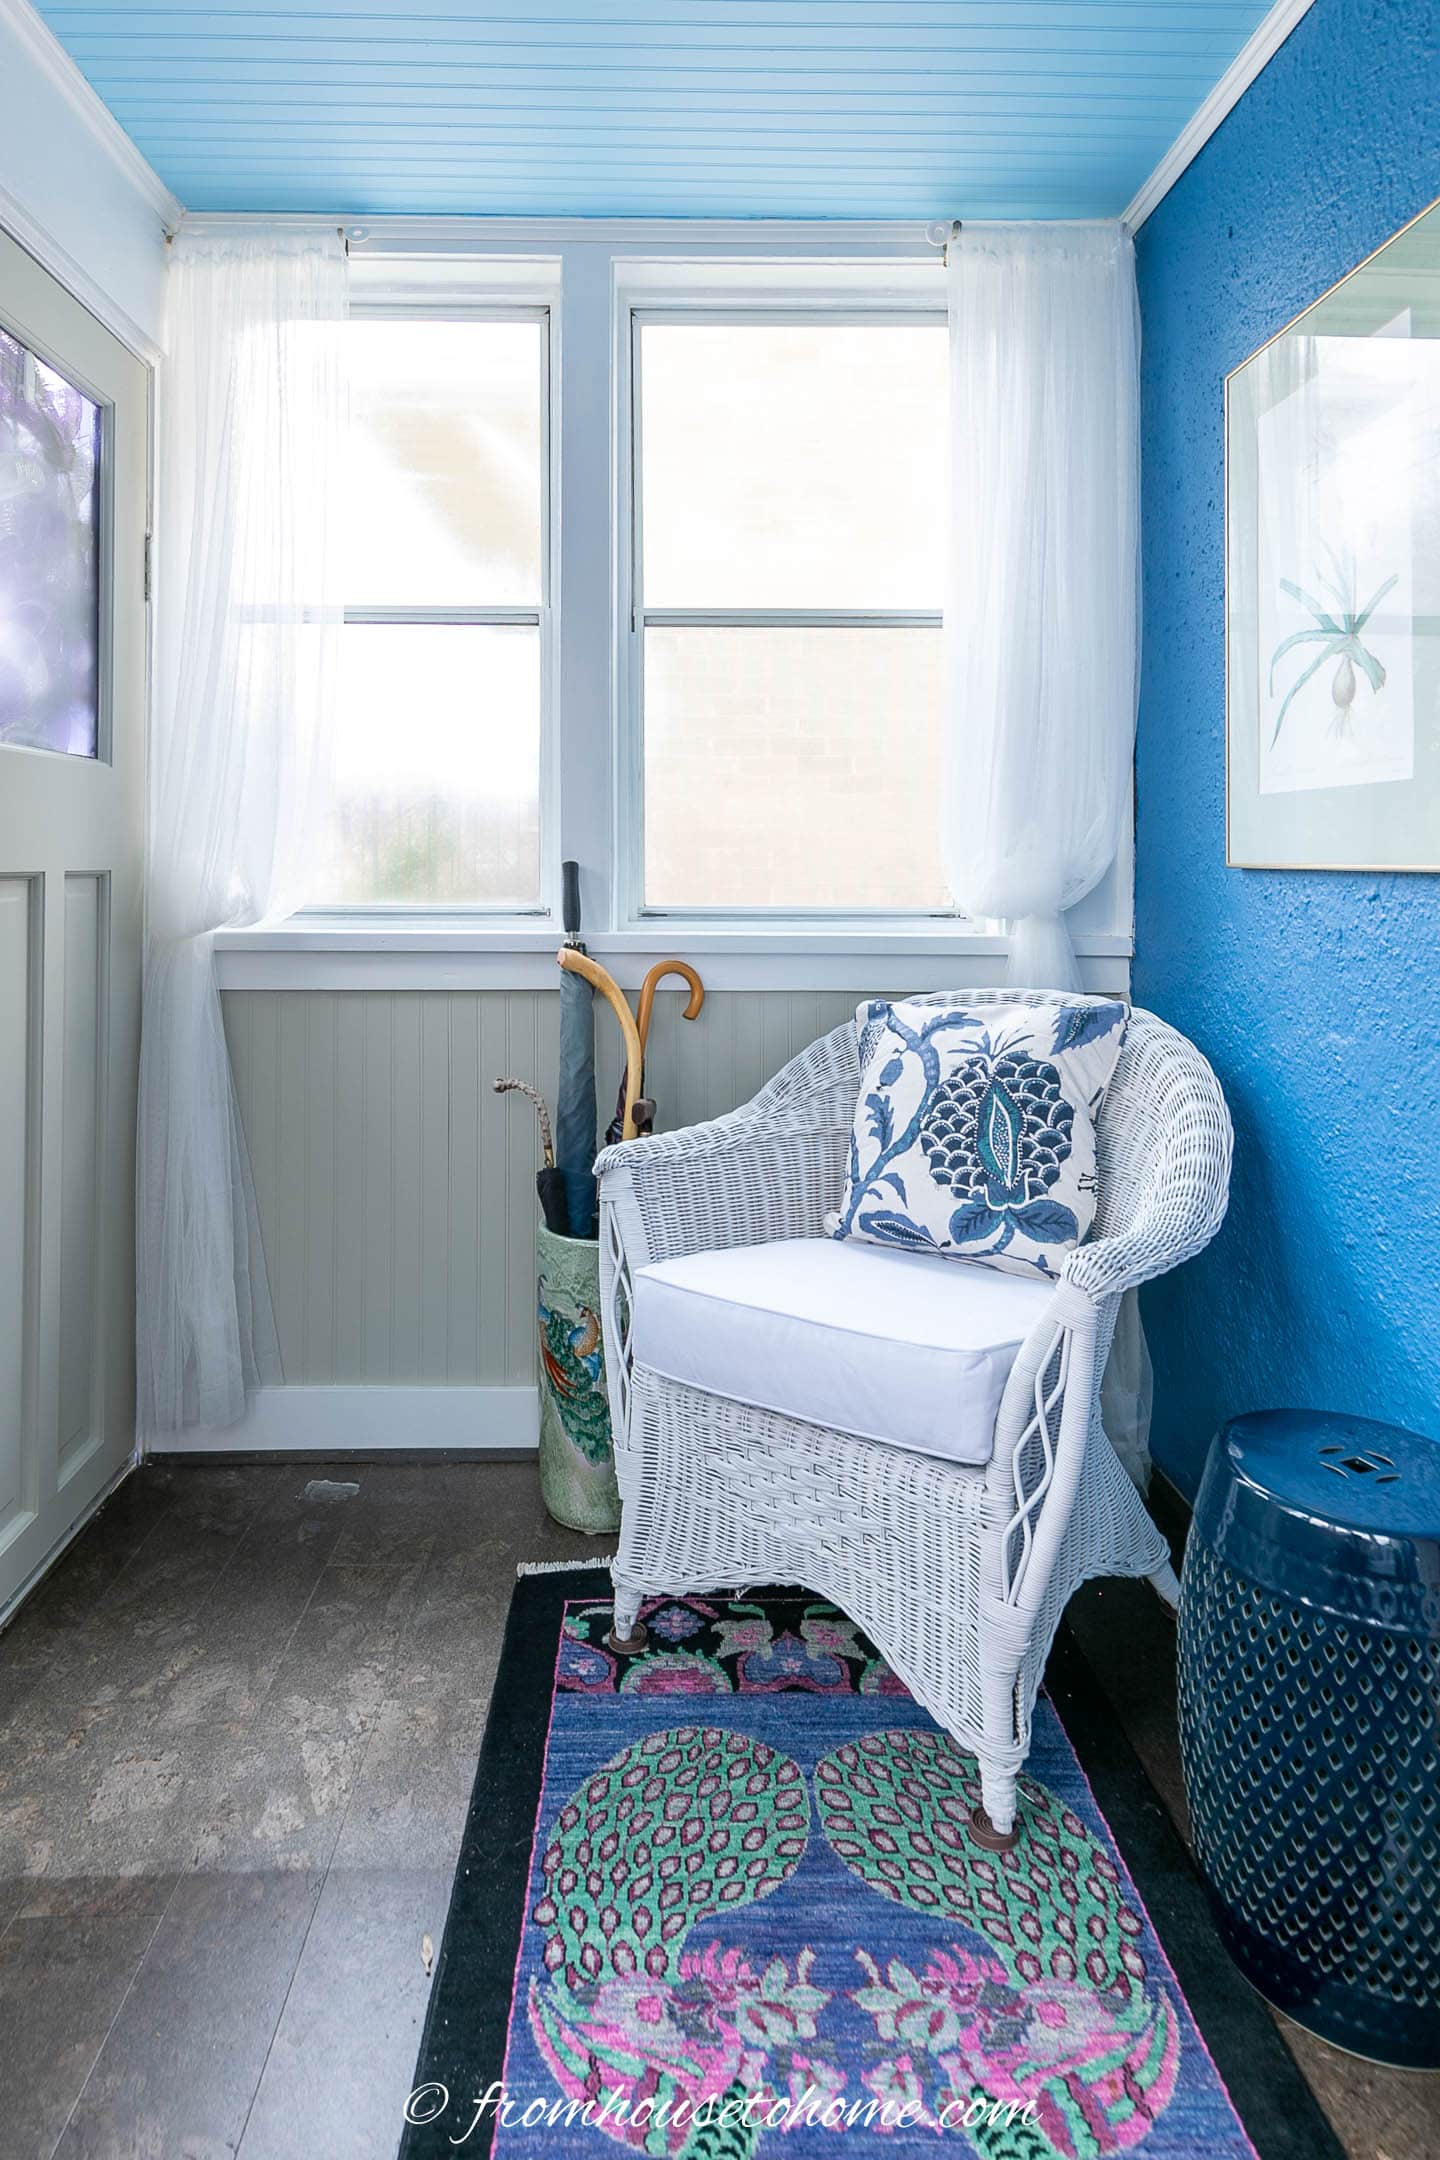 White and blue chair beside a dark blue ceramic garden stool in a blue and white front porch